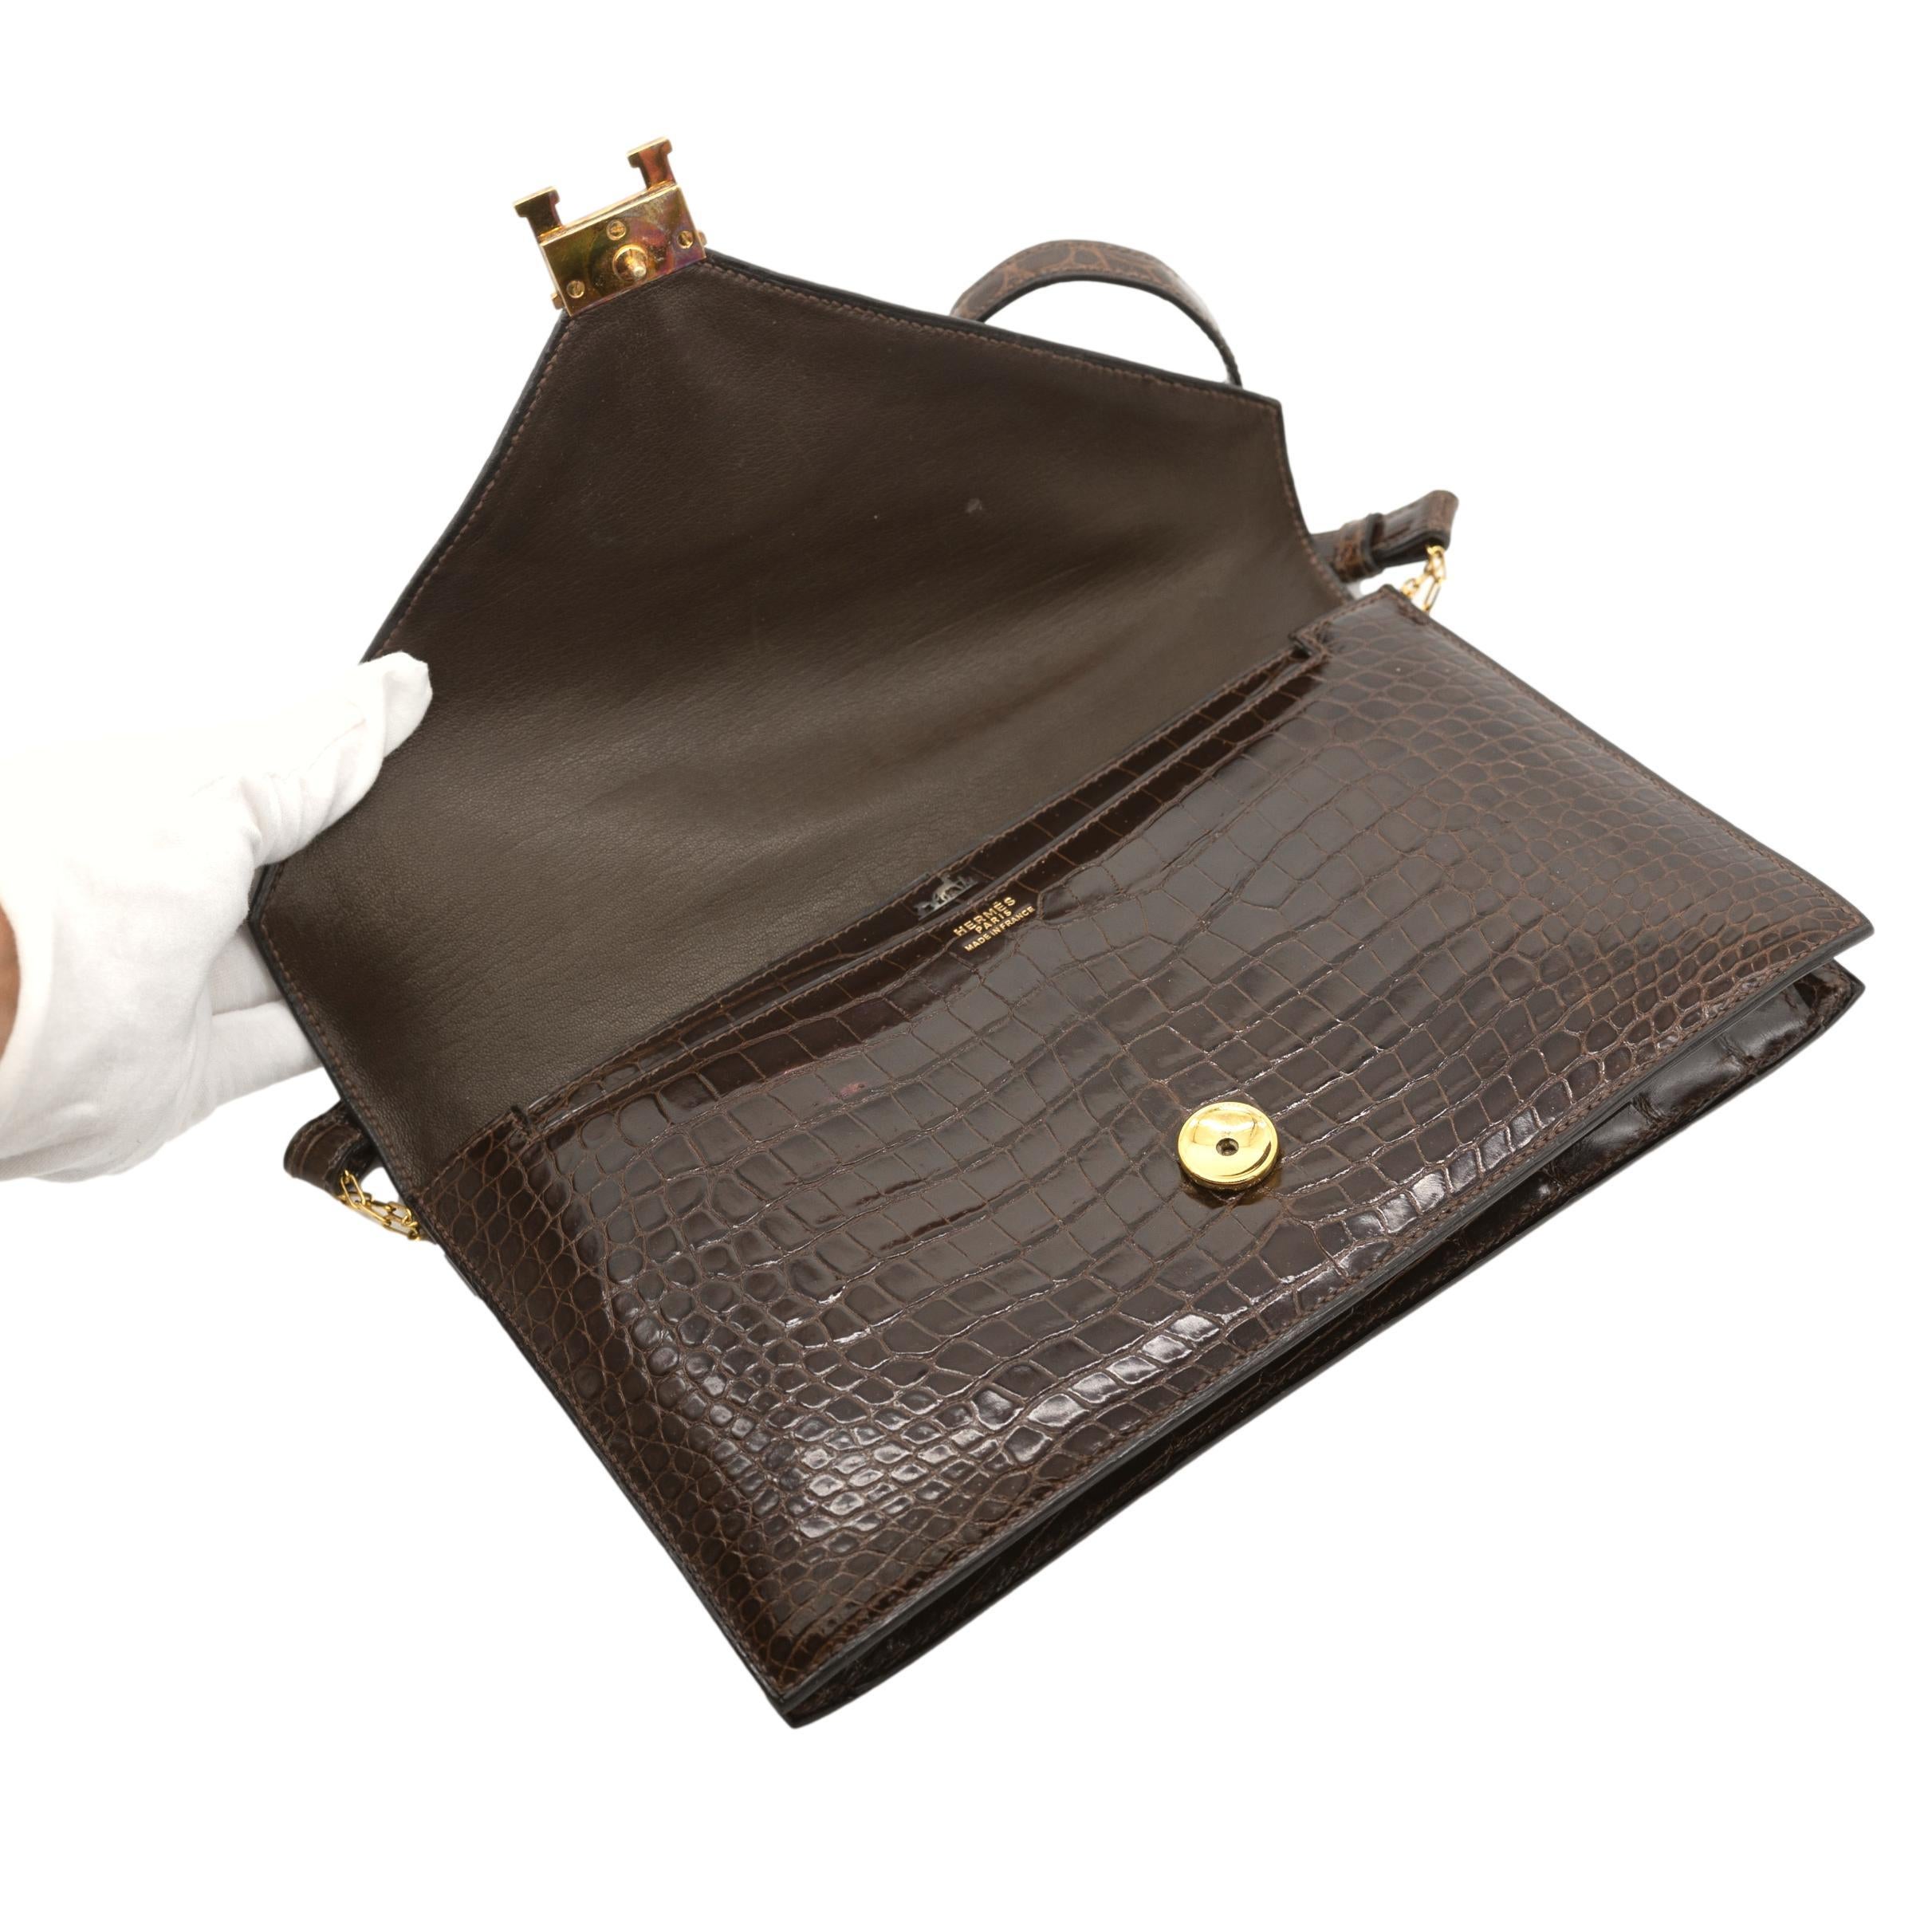 Hermès Brown Crocodile Lydie Crossbody Envelope Shoulder Bag, 1980. This collectors piece is truly an exceptional representation of the Hermès craftsmanship and attention to detail. The structure of the Lydie is bold and elegant, perfect for formal